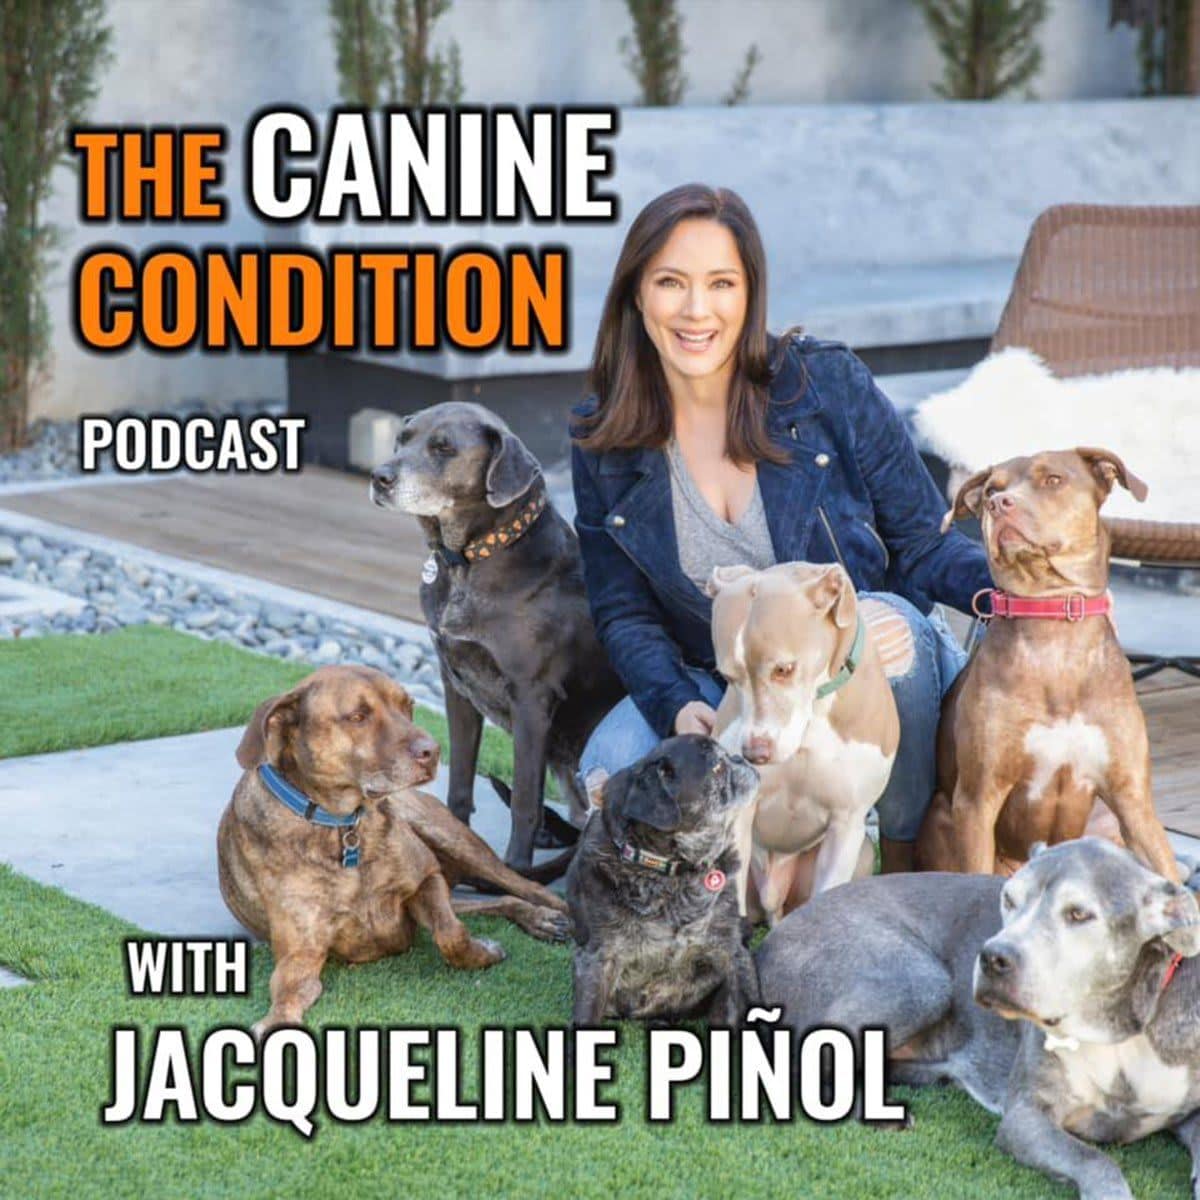 The Canine Condition Podcast